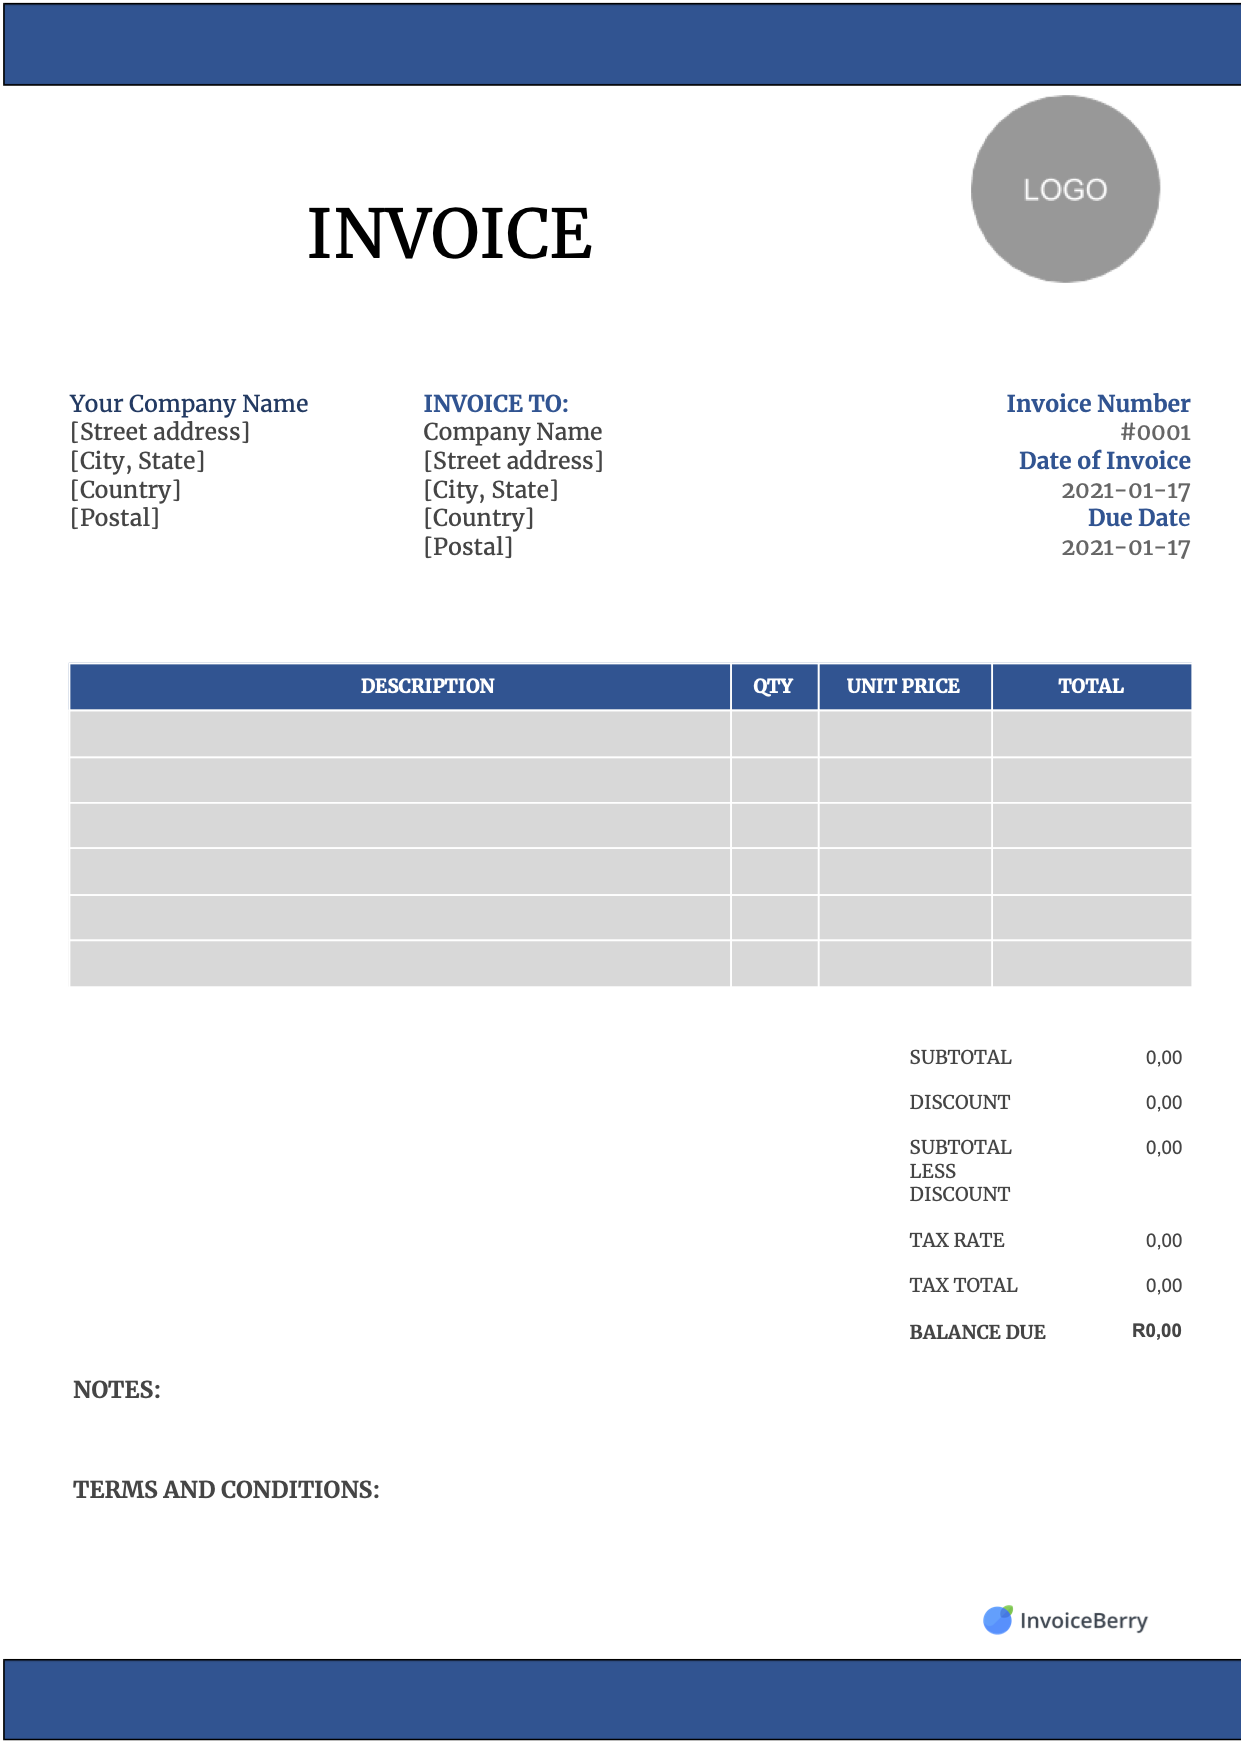 Free Invoice Templates Download - All Formats and Industries Inside Free Downloadable Invoice Template For Word